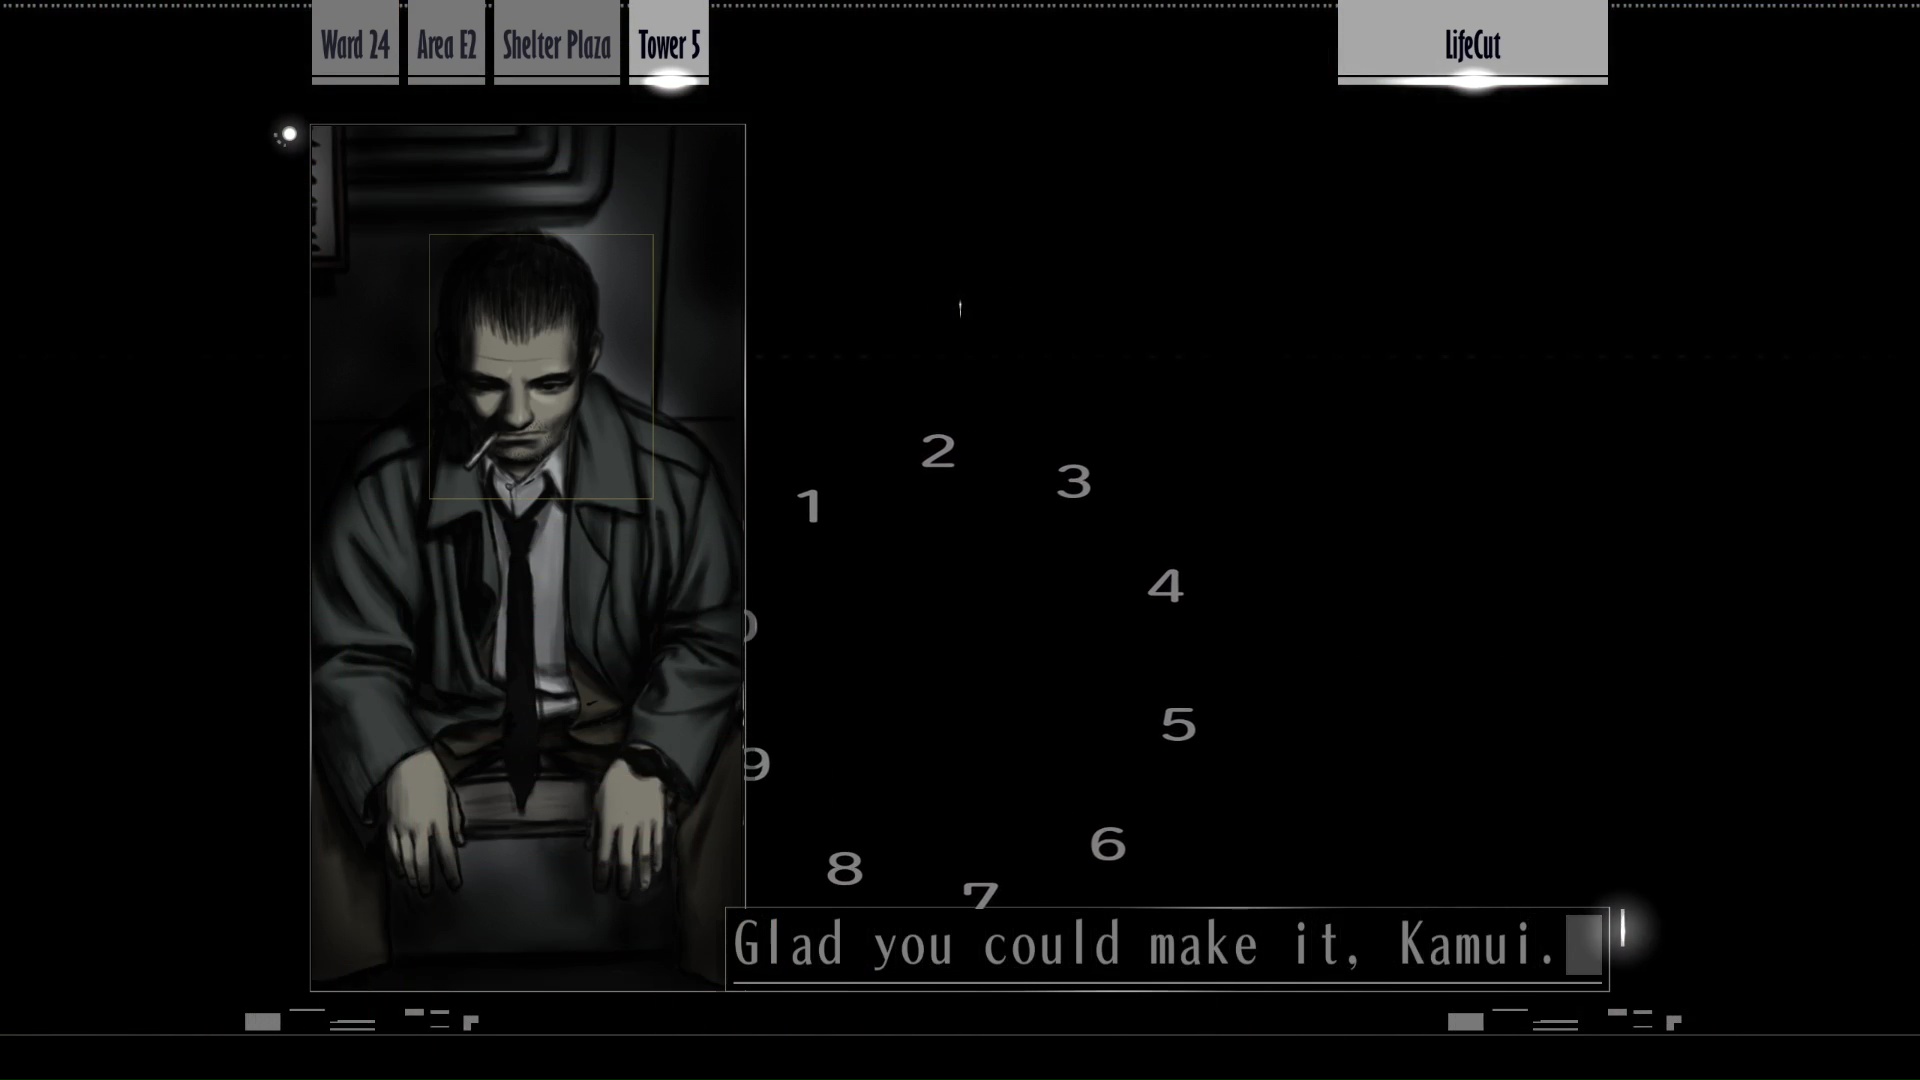 Screenshot from "LifeCut." Kusabi sits on a bed in Triangle Tower 5. He says to Akira, "Glad you could make it, Kamui."